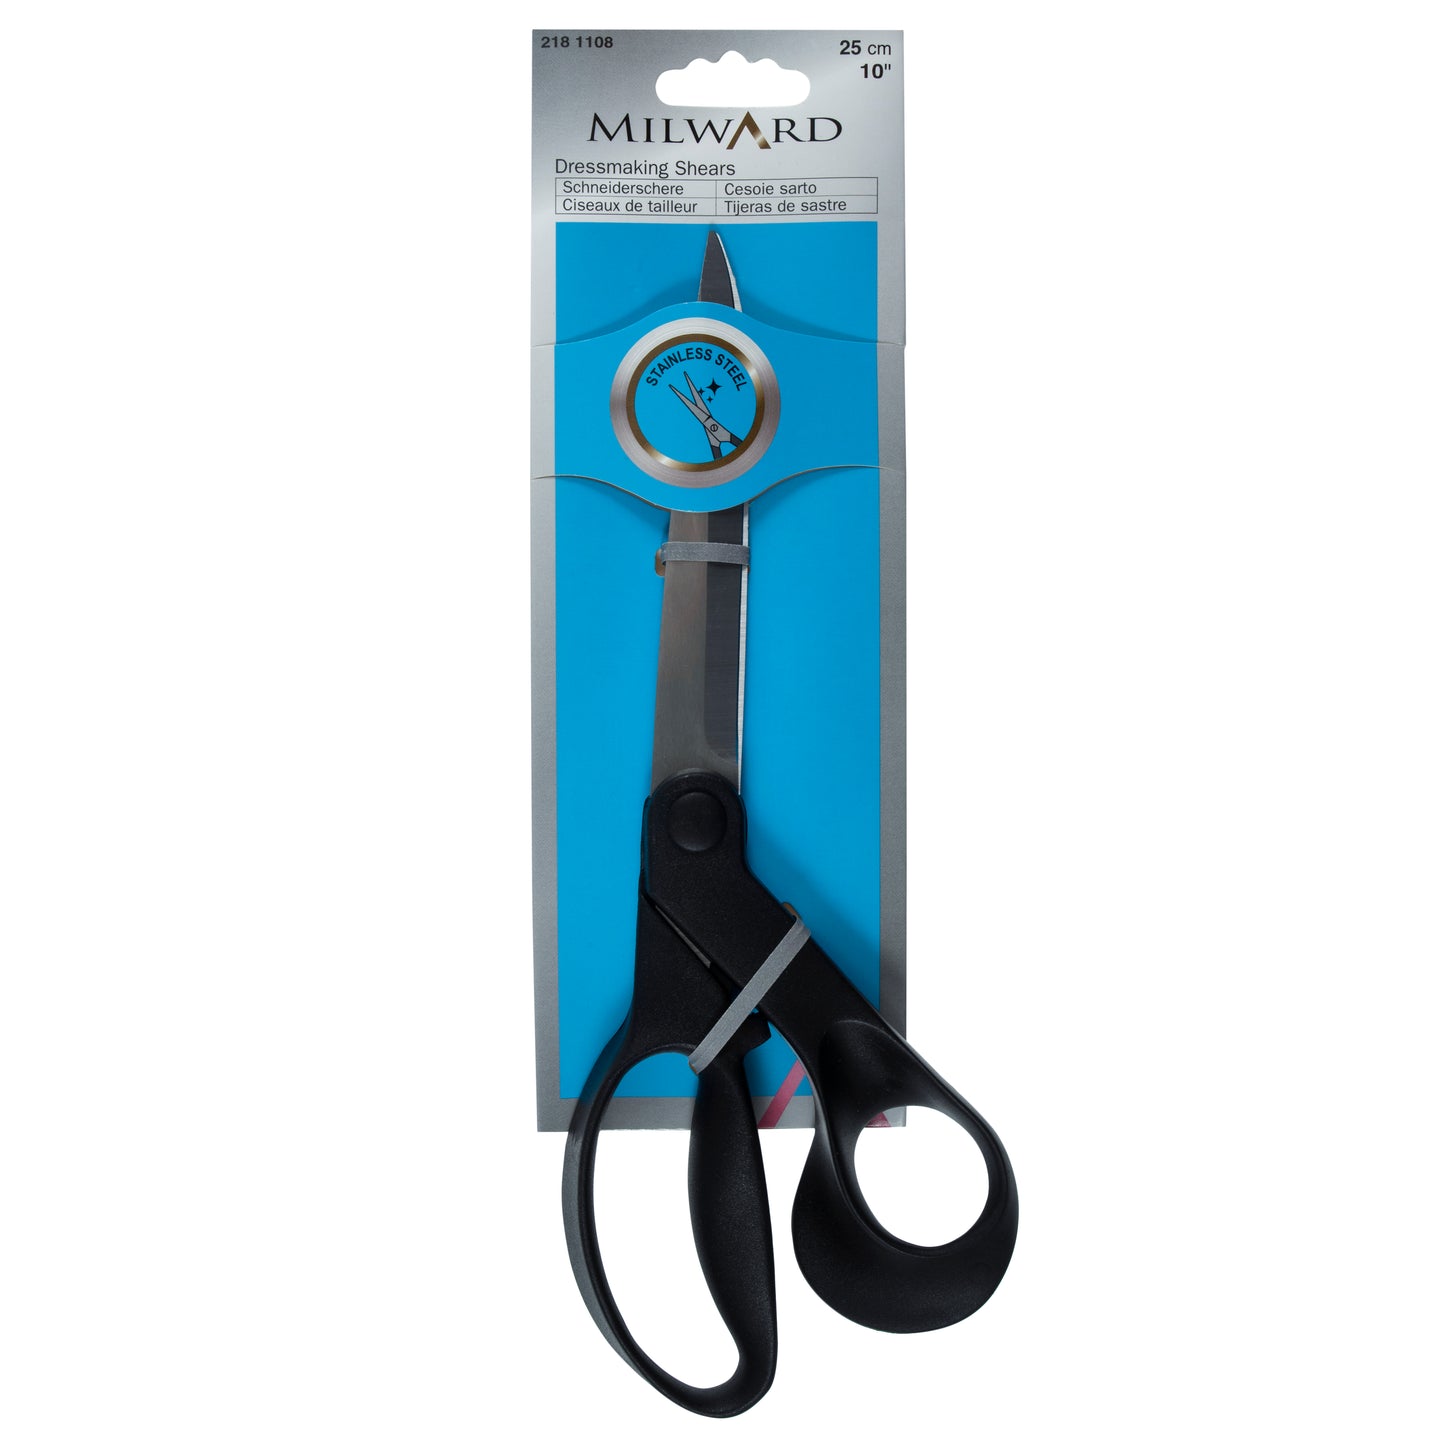 Milward Dressmakers Scissor Shears 25cm - Stainless steel titanium coated blades (cuts up to 20 layers in one go)